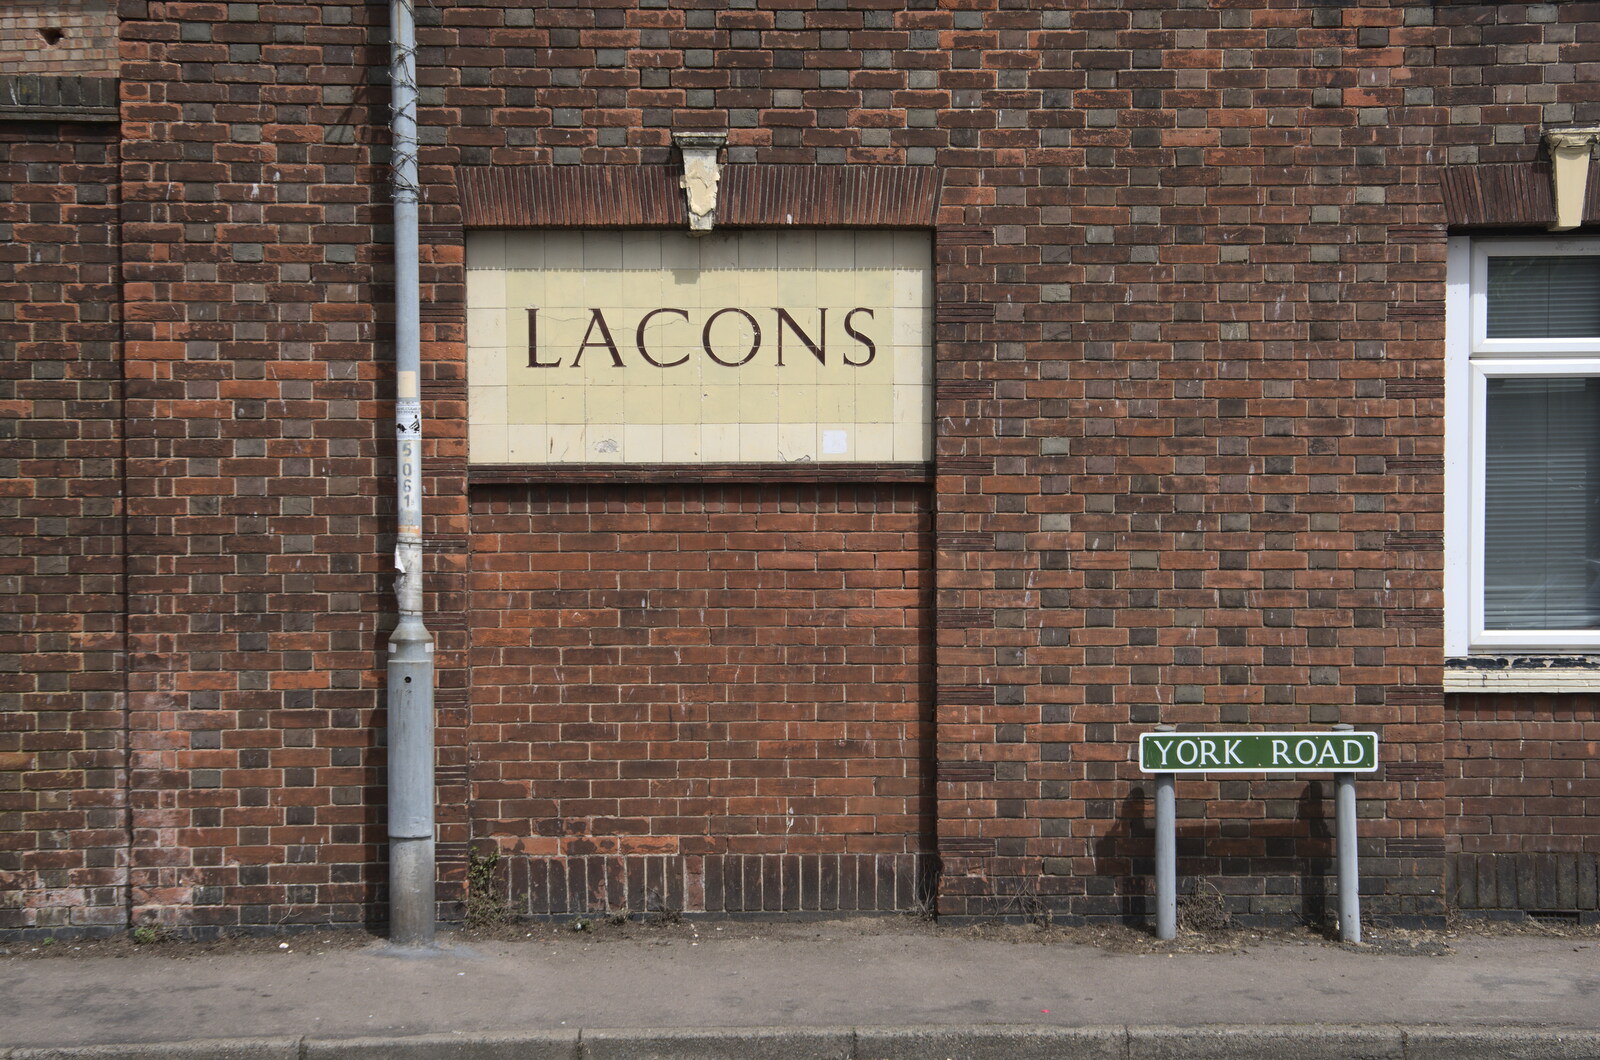 An old Lacons pub sign from Faded Seaside Glamour: A Weekend in Great Yarmouth, Norfolk - 29th May 2022